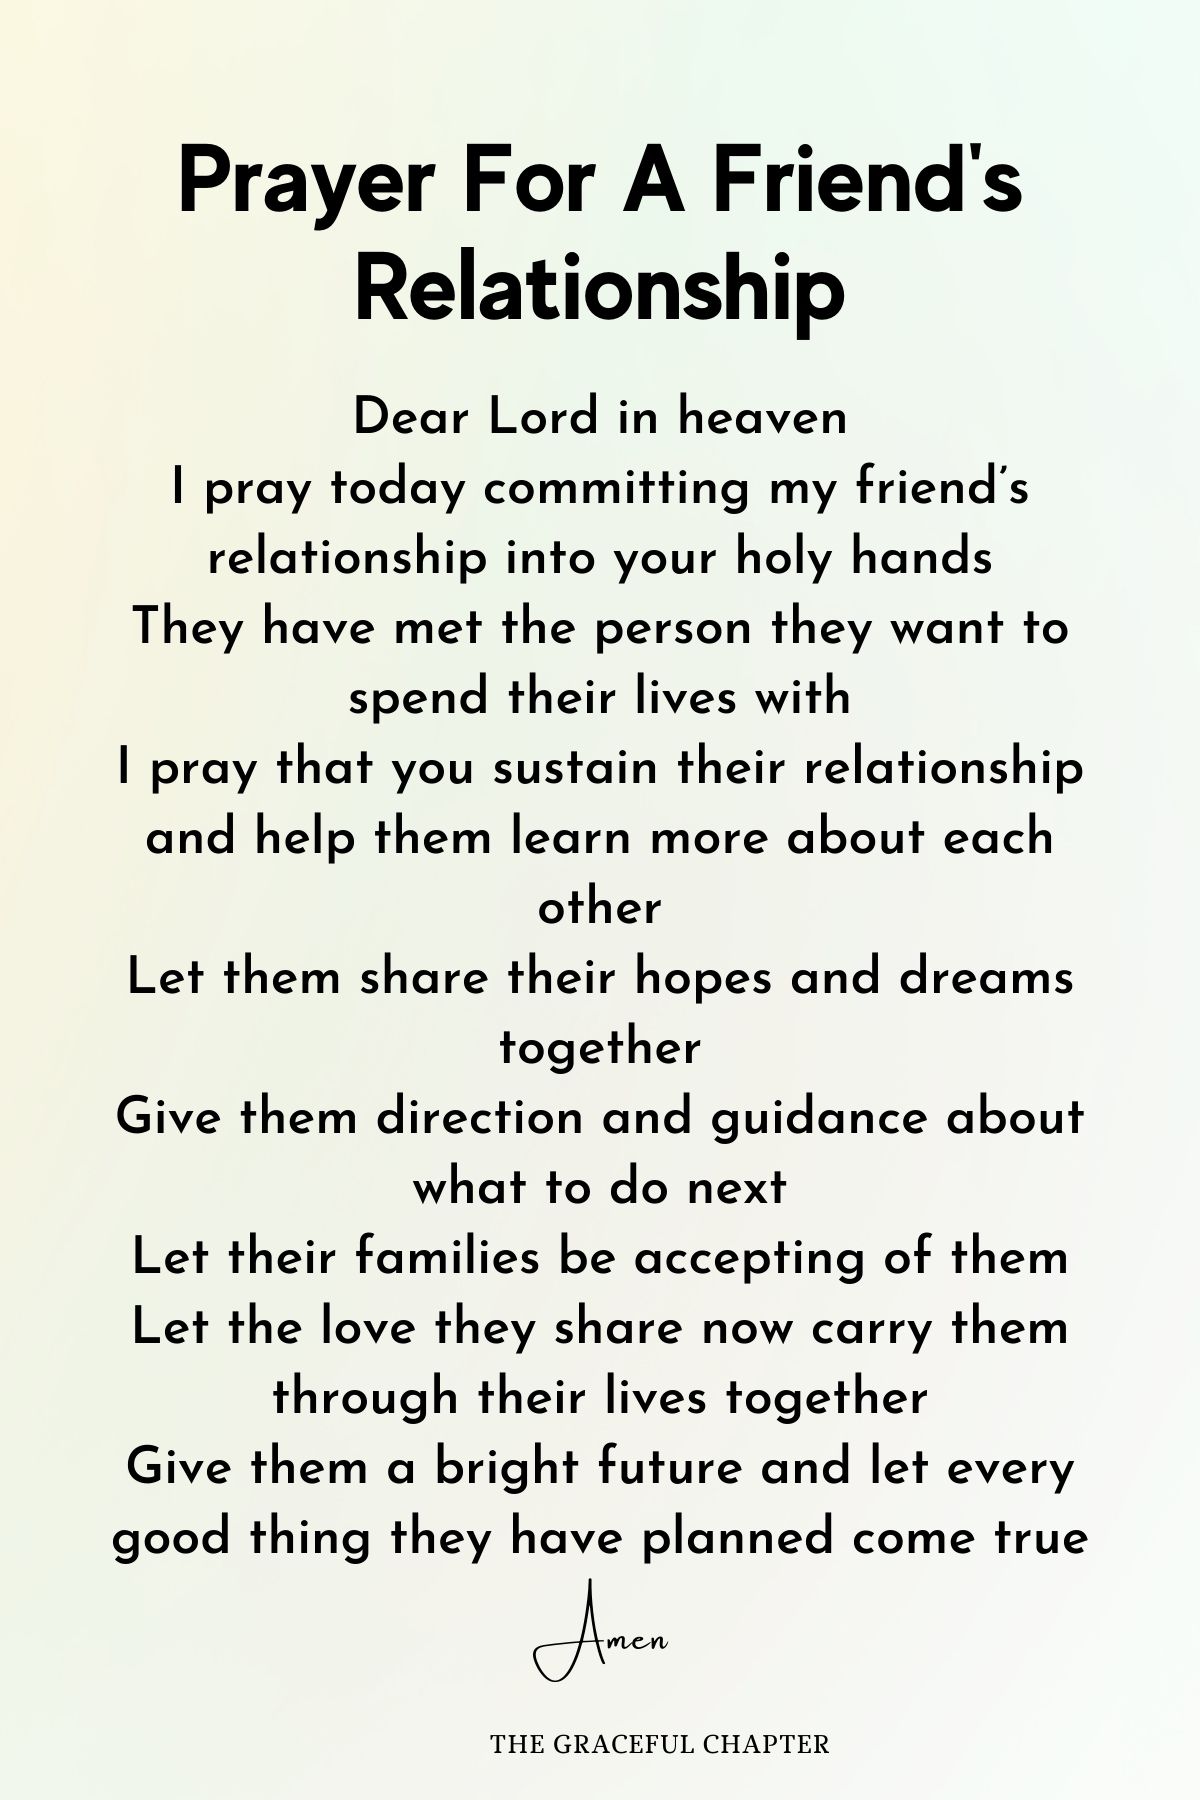 Prayer for a friend's relationship prayers for friends